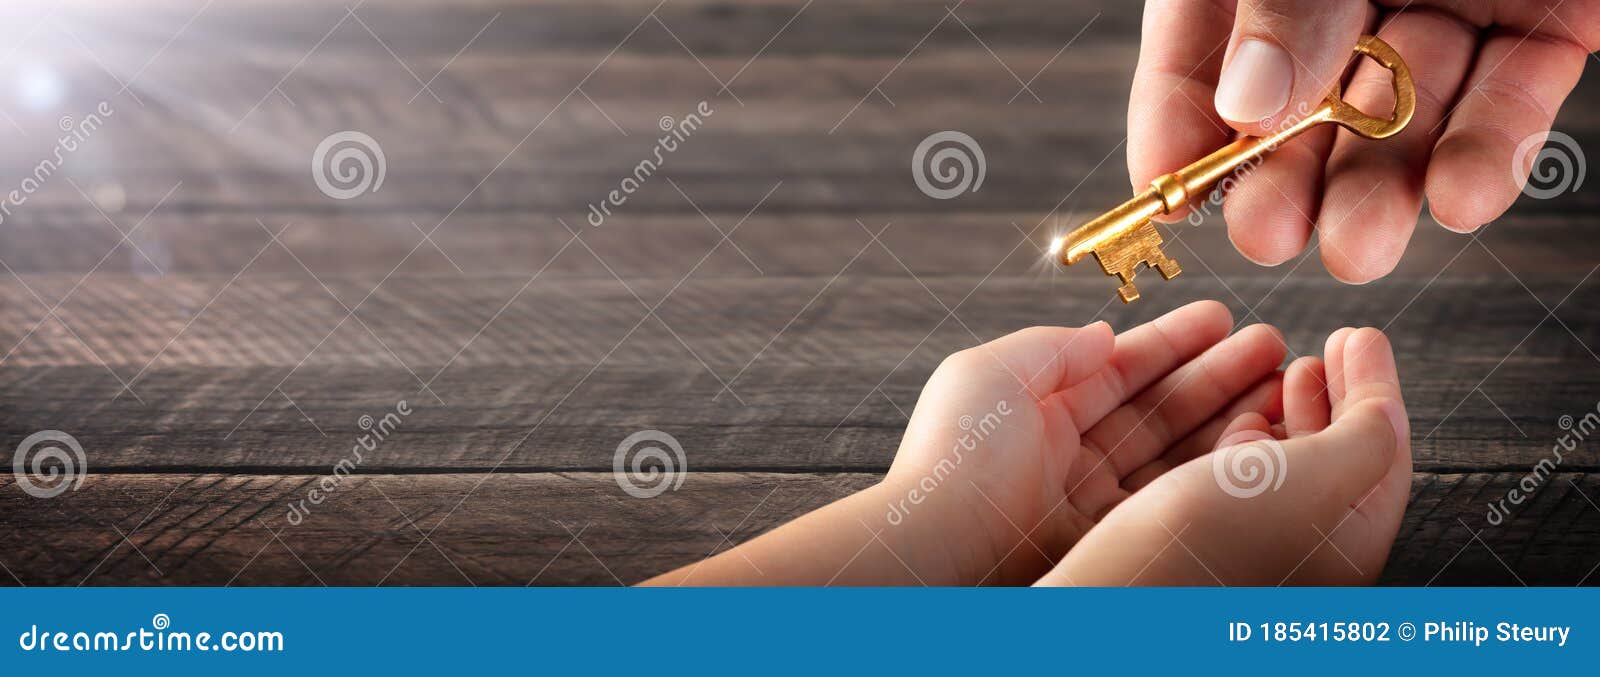 hand of father giving old golden key to child